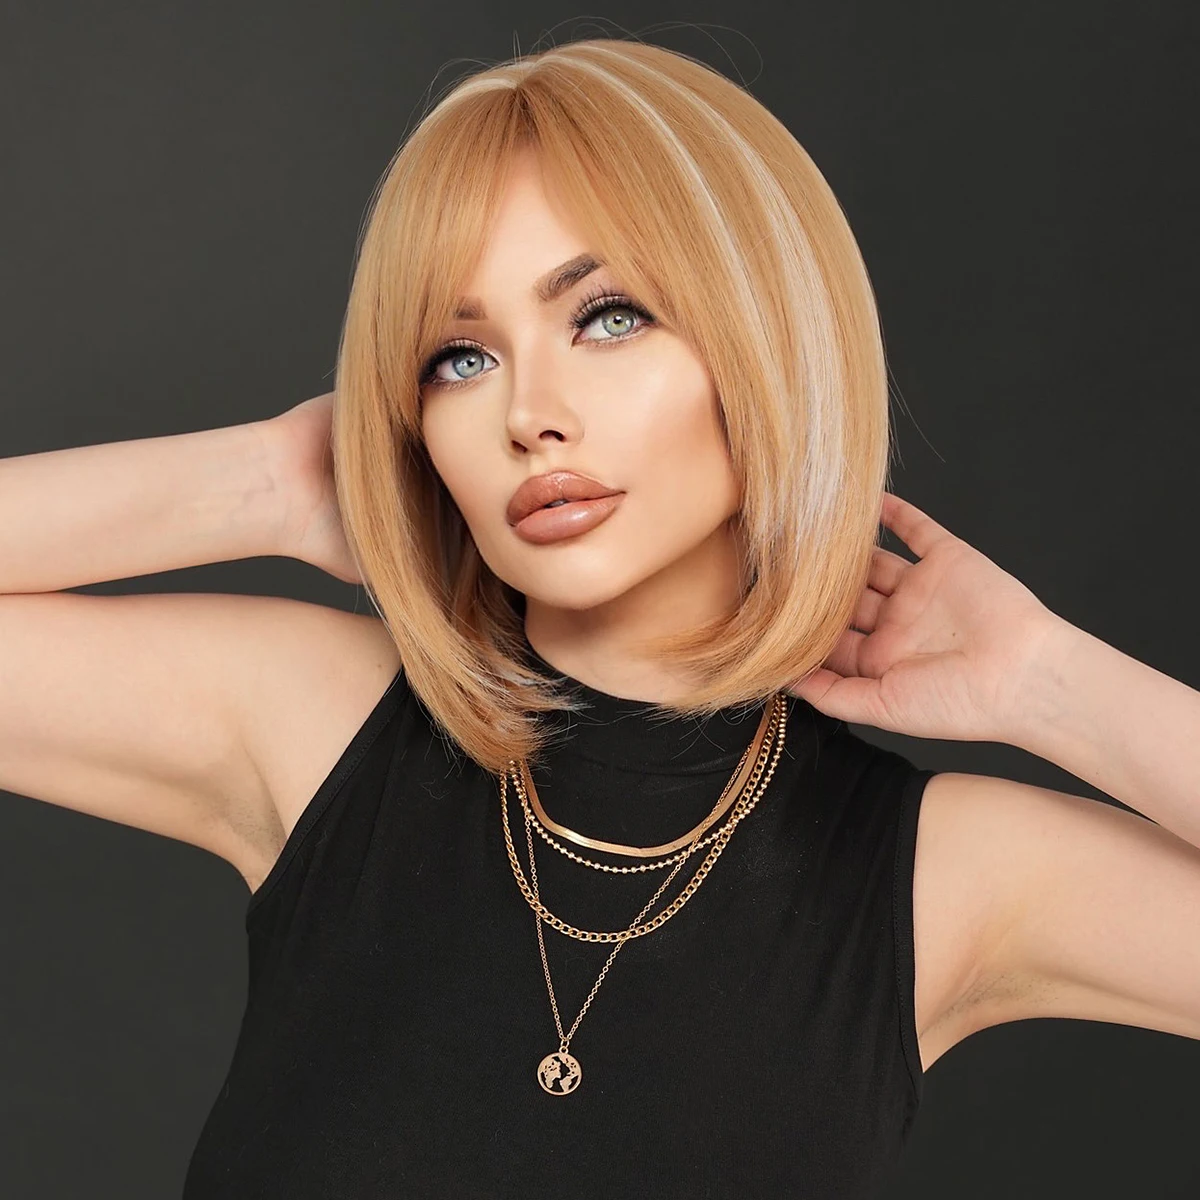 7JHH WIGS Shoulder Length Blonde Bob Wigs with Neat Bangs High Density Synthetic Highlight Beige Hair Wig for Women Daily Use